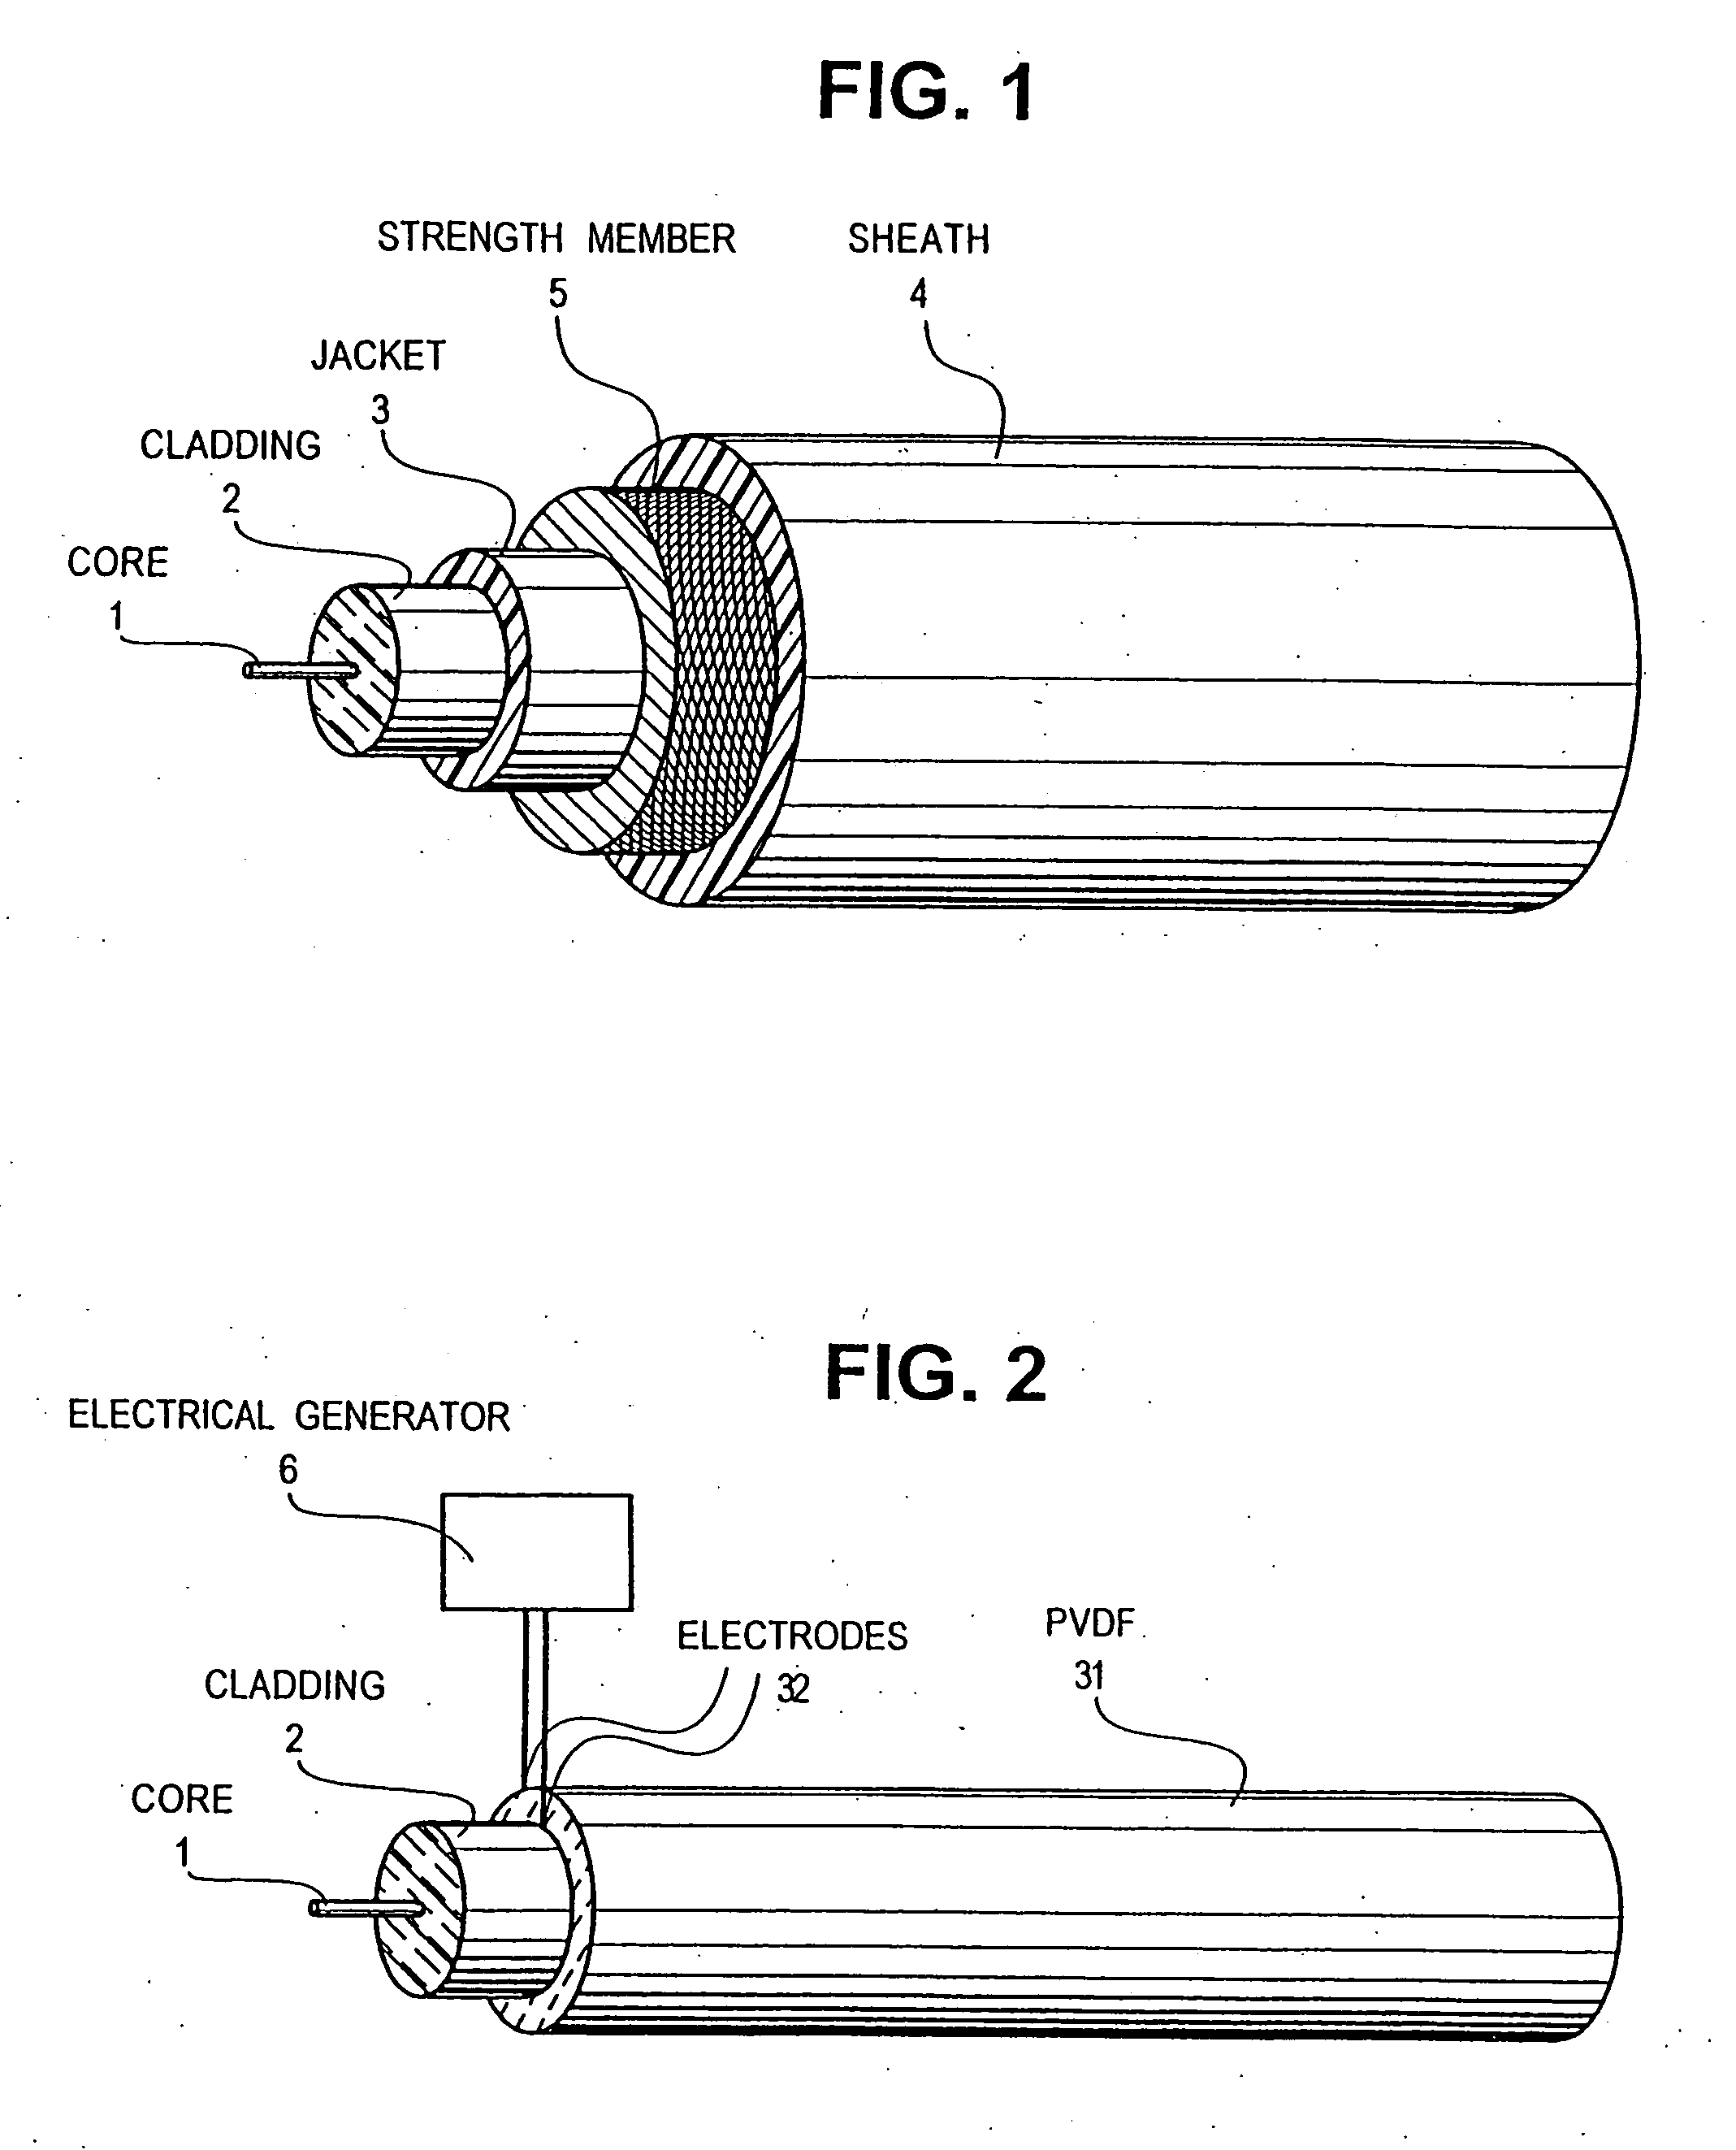 Optical-acoustic imaging device